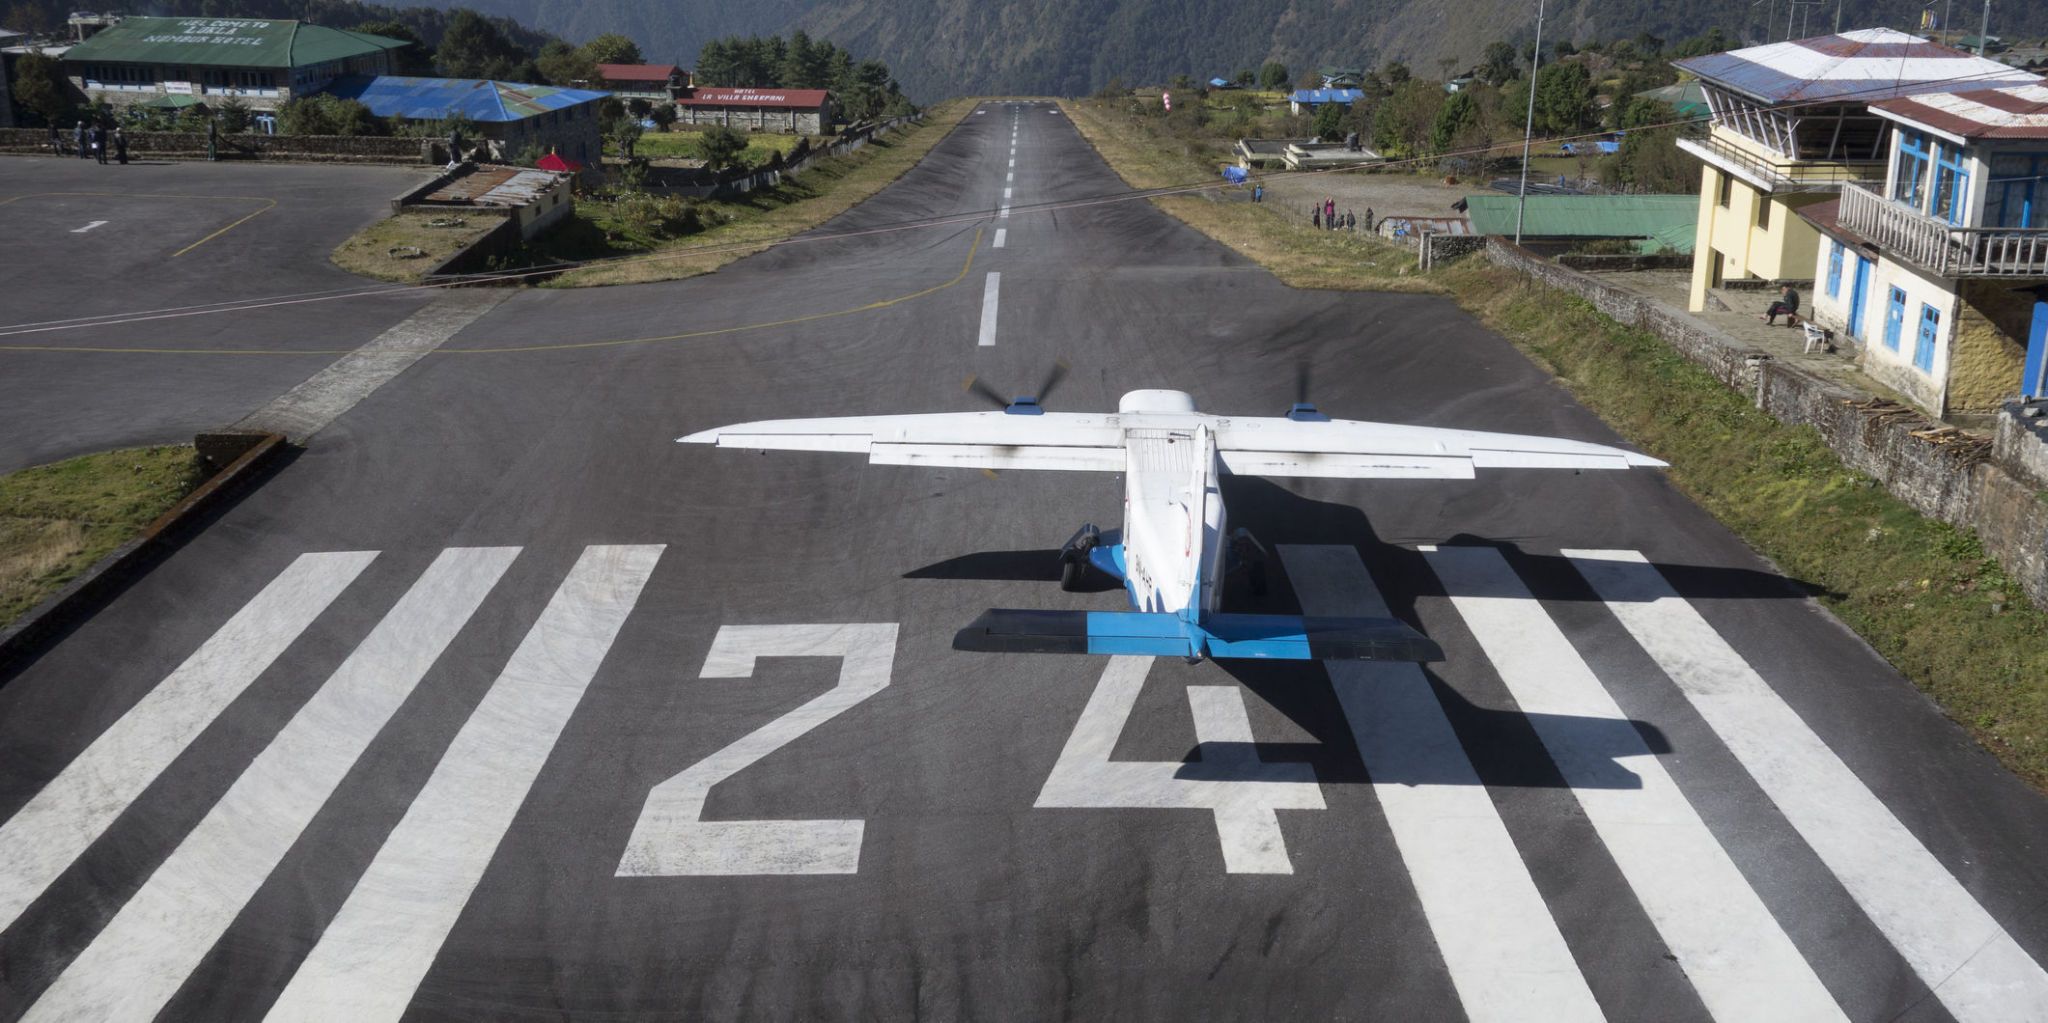 What Those Huge Numbers at the End of the Runway Really Mean